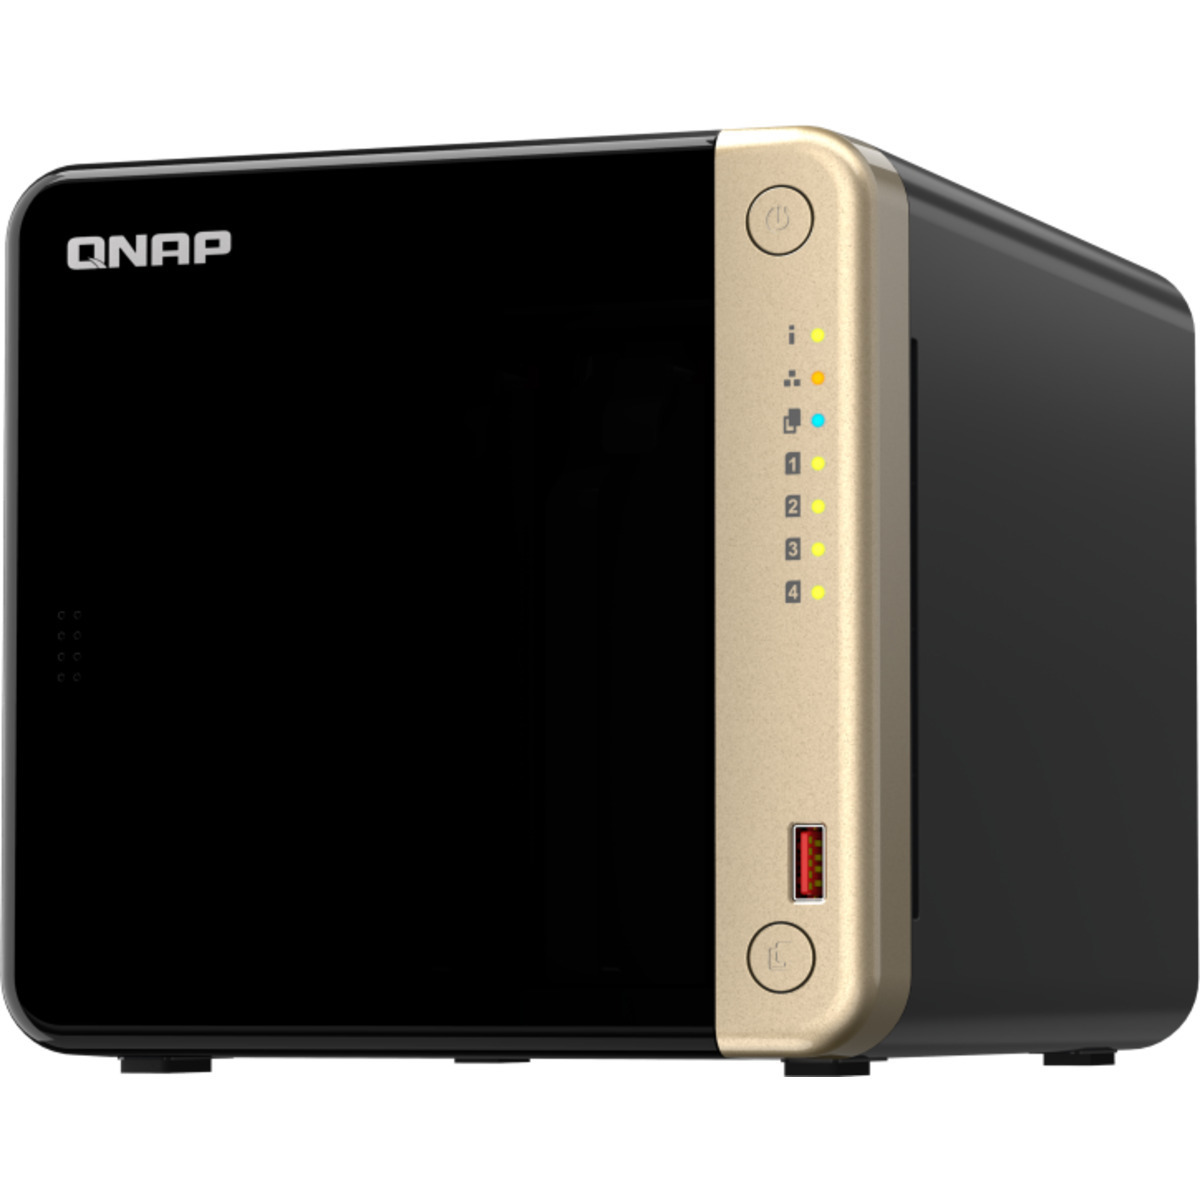 QNAP TS-464 72tb 4-Bay Desktop Multimedia / Power User / Business NAS - Network Attached Storage Device 3x24tb Seagate IronWolf Pro ST24000NT002 3.5 7200rpm SATA 6Gb/s HDD NAS Class Drives Installed - Burn-In Tested TS-464